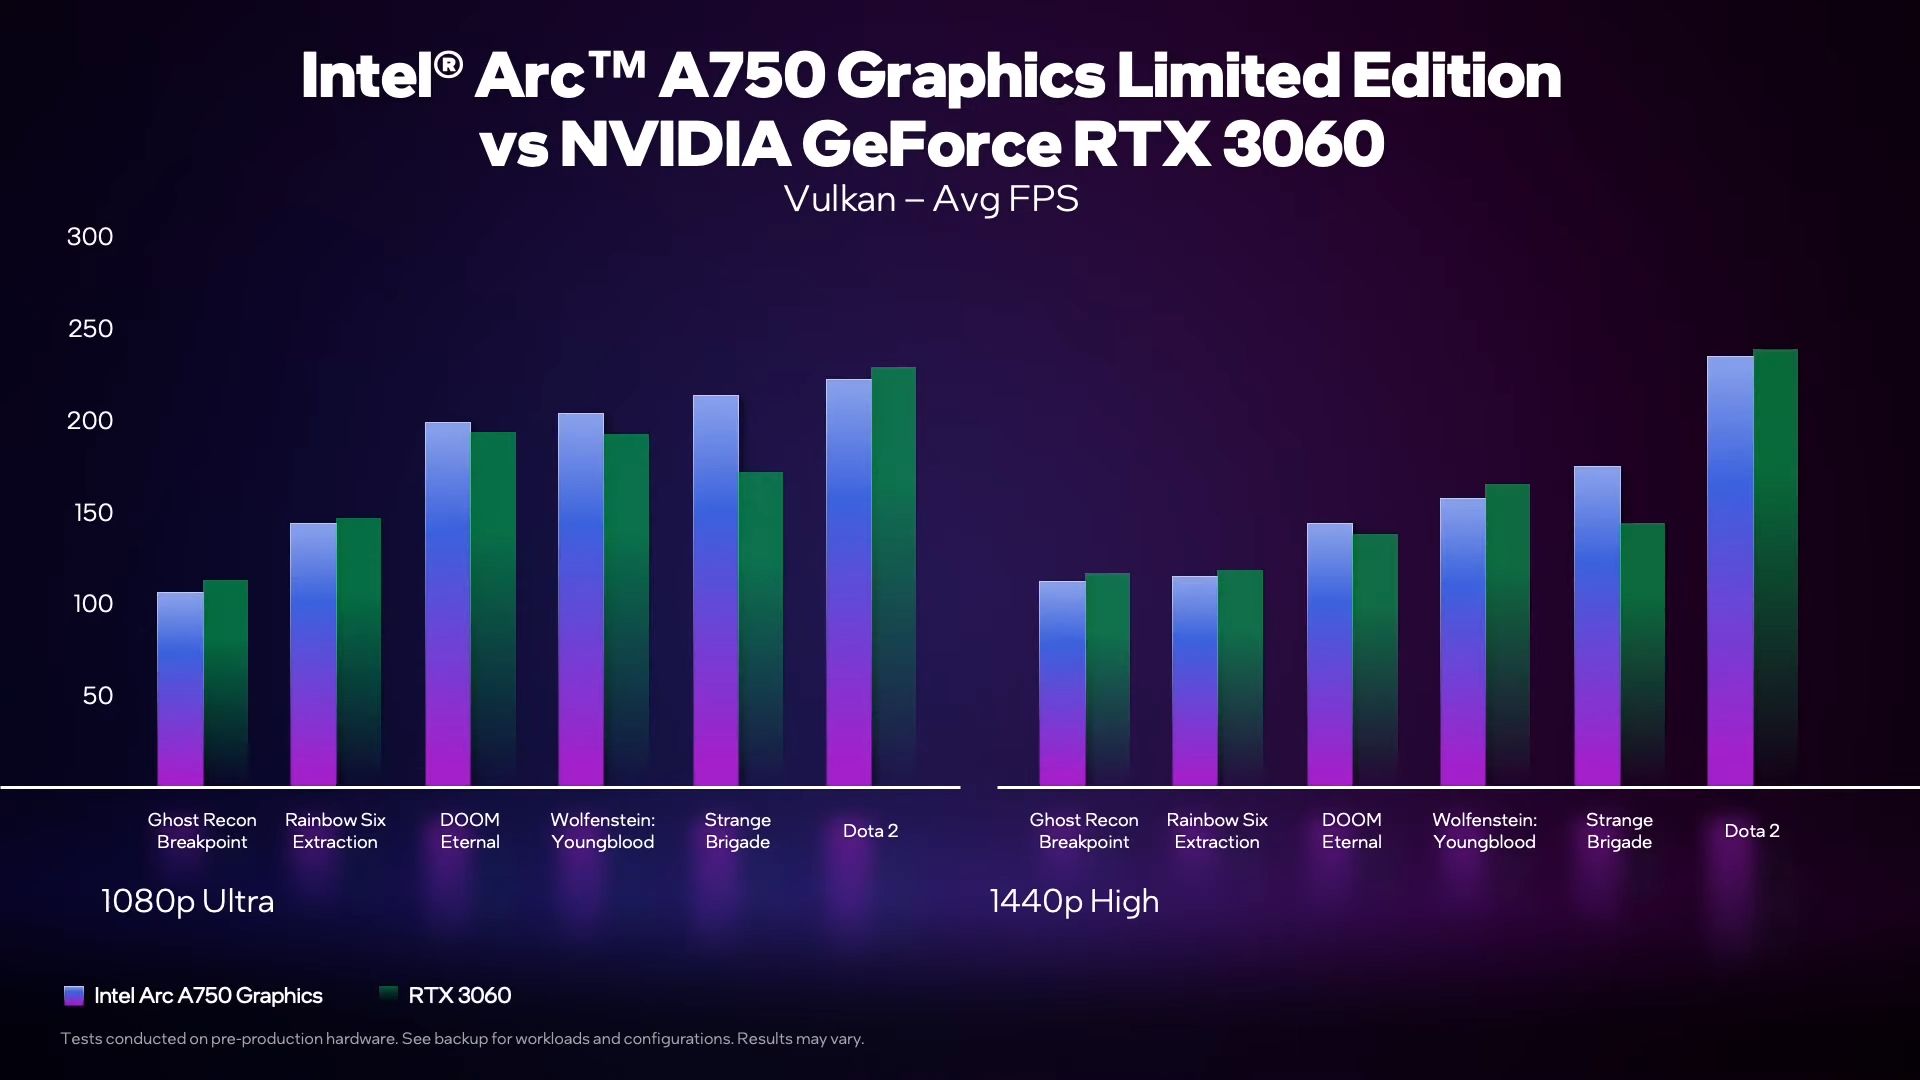 Intel shares 48 benchmarks to show its Arc A750 can compete with an RTX  3060 - The Verge